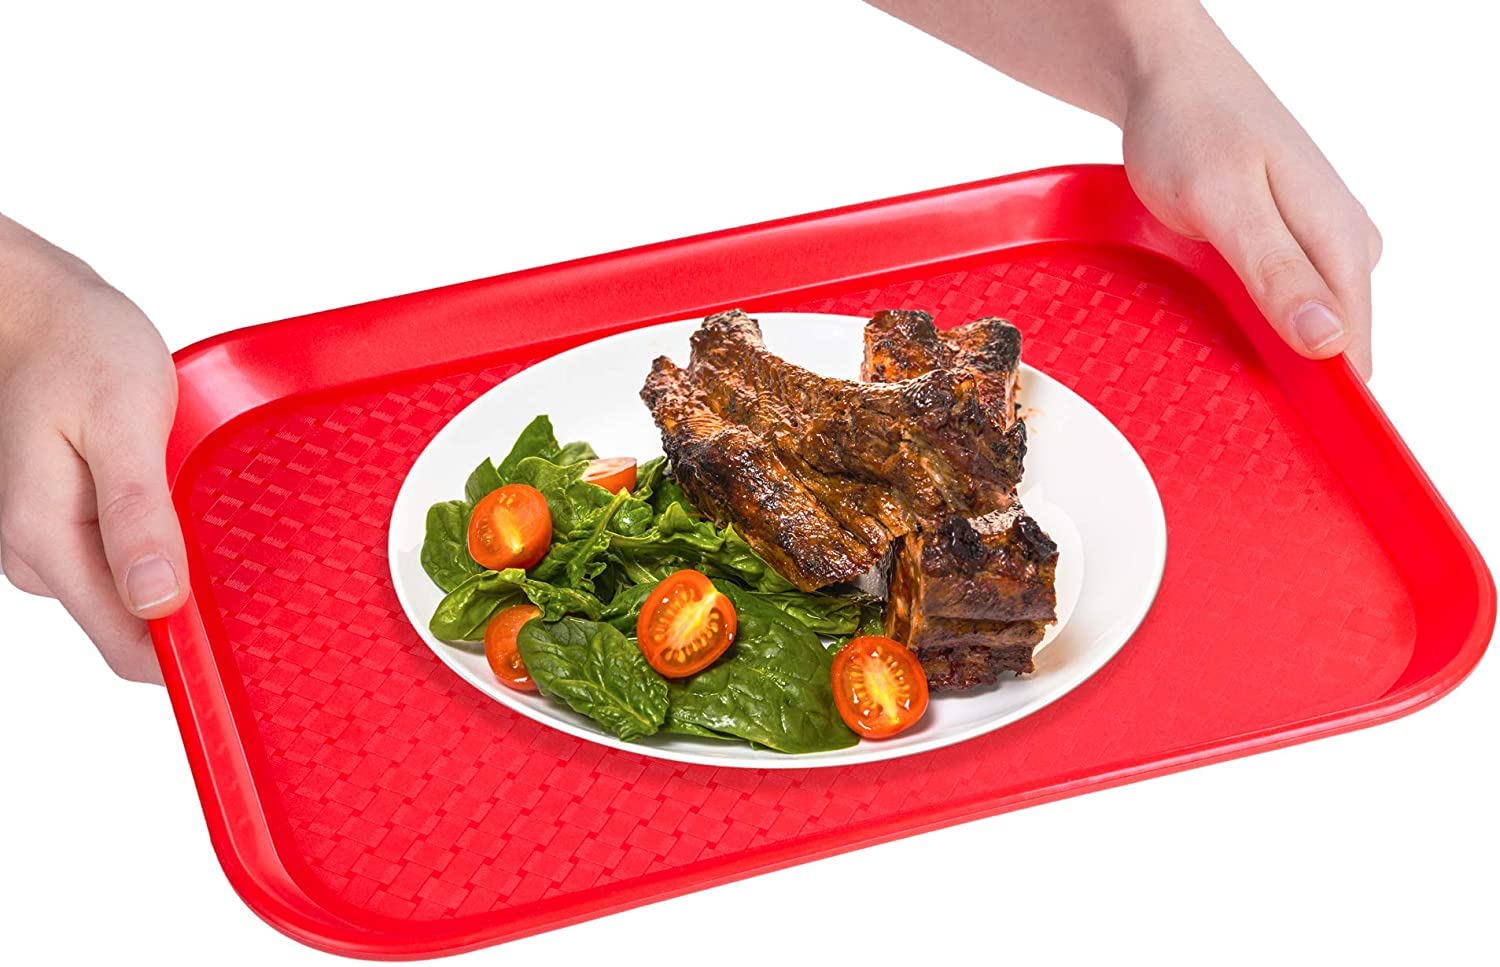 NJ Plastic Serving Platter Large Tray Unbreakable Snacks Tea Serving Tray Red Drink Breakfast Tea Dinner Coffee Salad Food for Dinning Table Home Kitchen (16 X 12 Inches) : Red 3 Pcs.